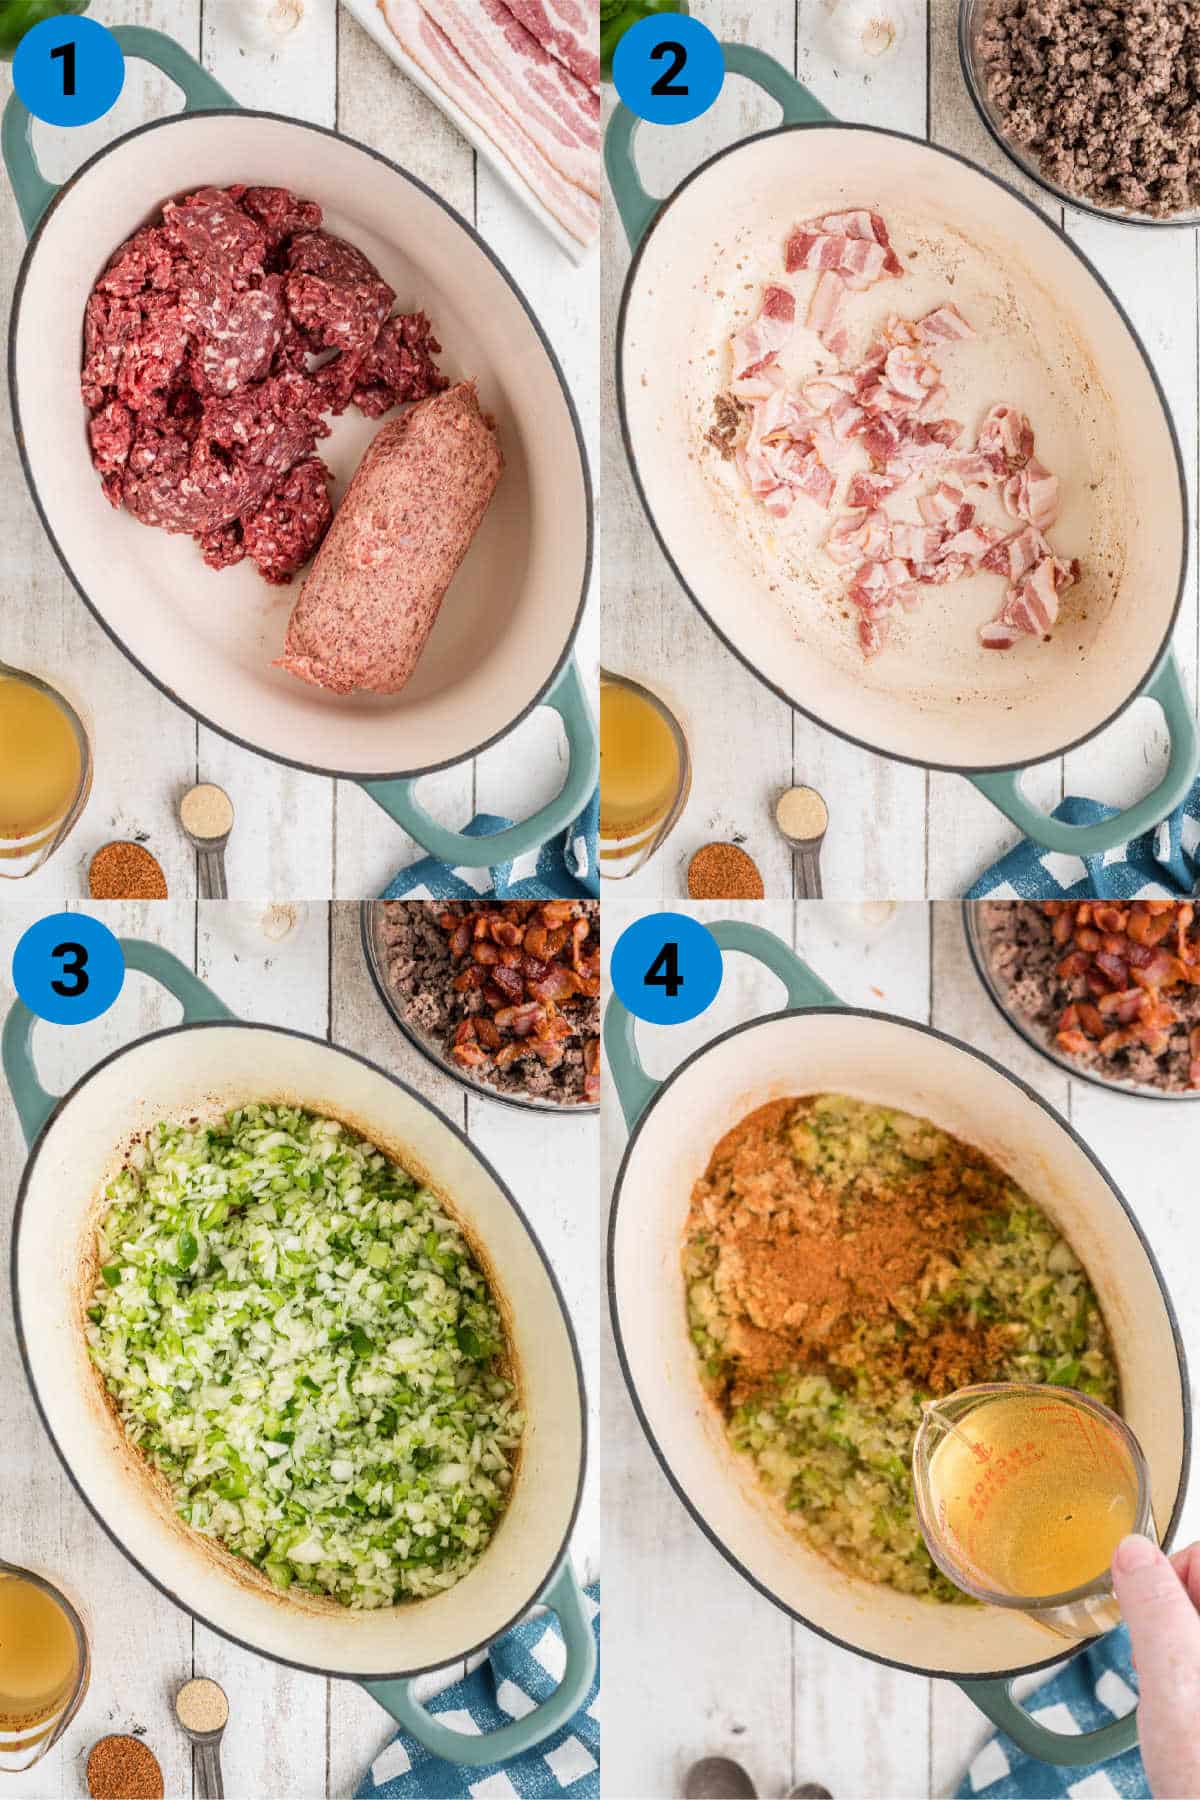 A collage of four images showing how to make Louisiana dirty rice, steps 1-4.